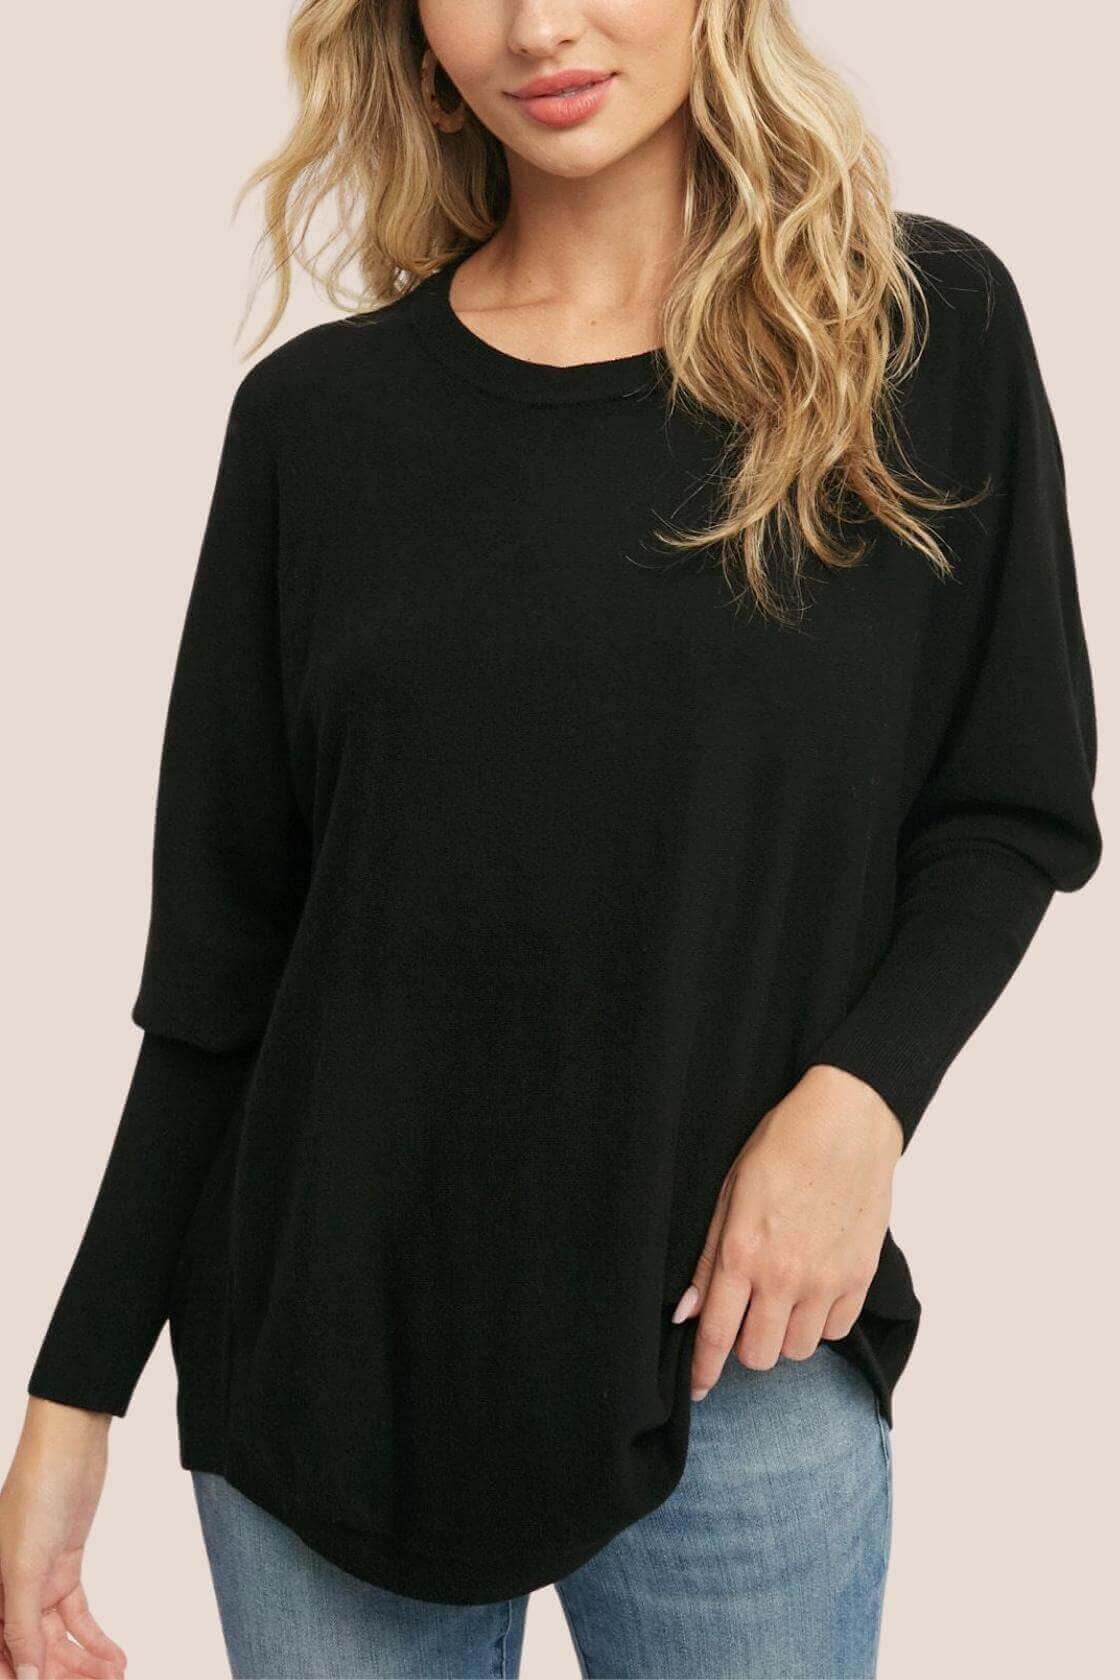 Black Pullover With Batwing Sleeves - Rocca & Co